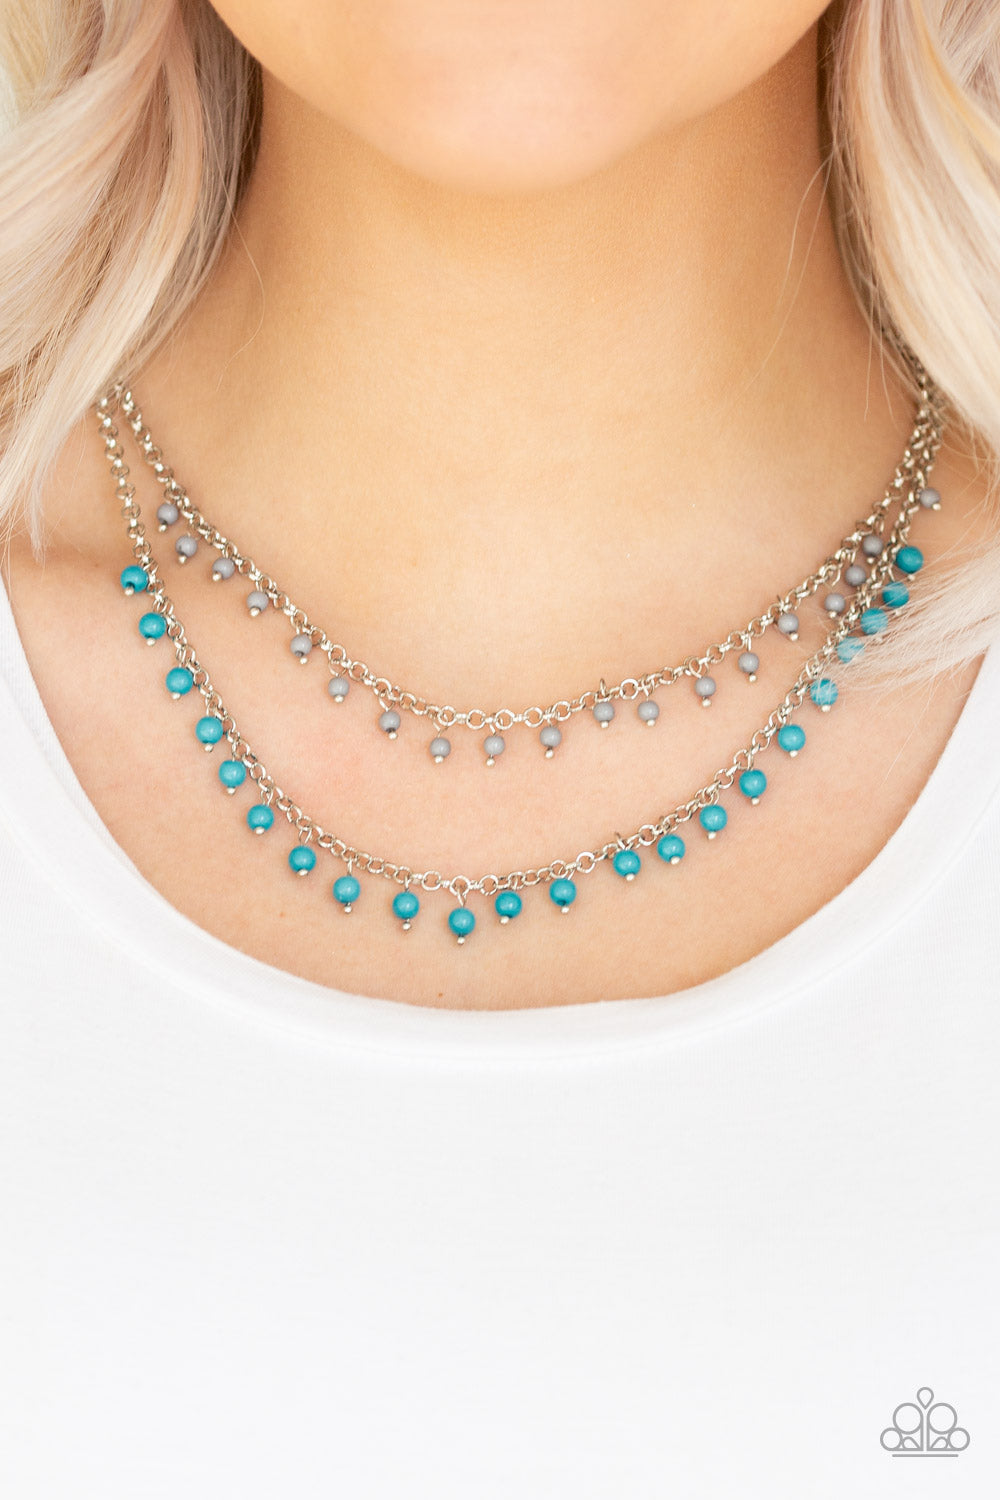 Paparazzi Dainty Distraction Blue Short Necklace